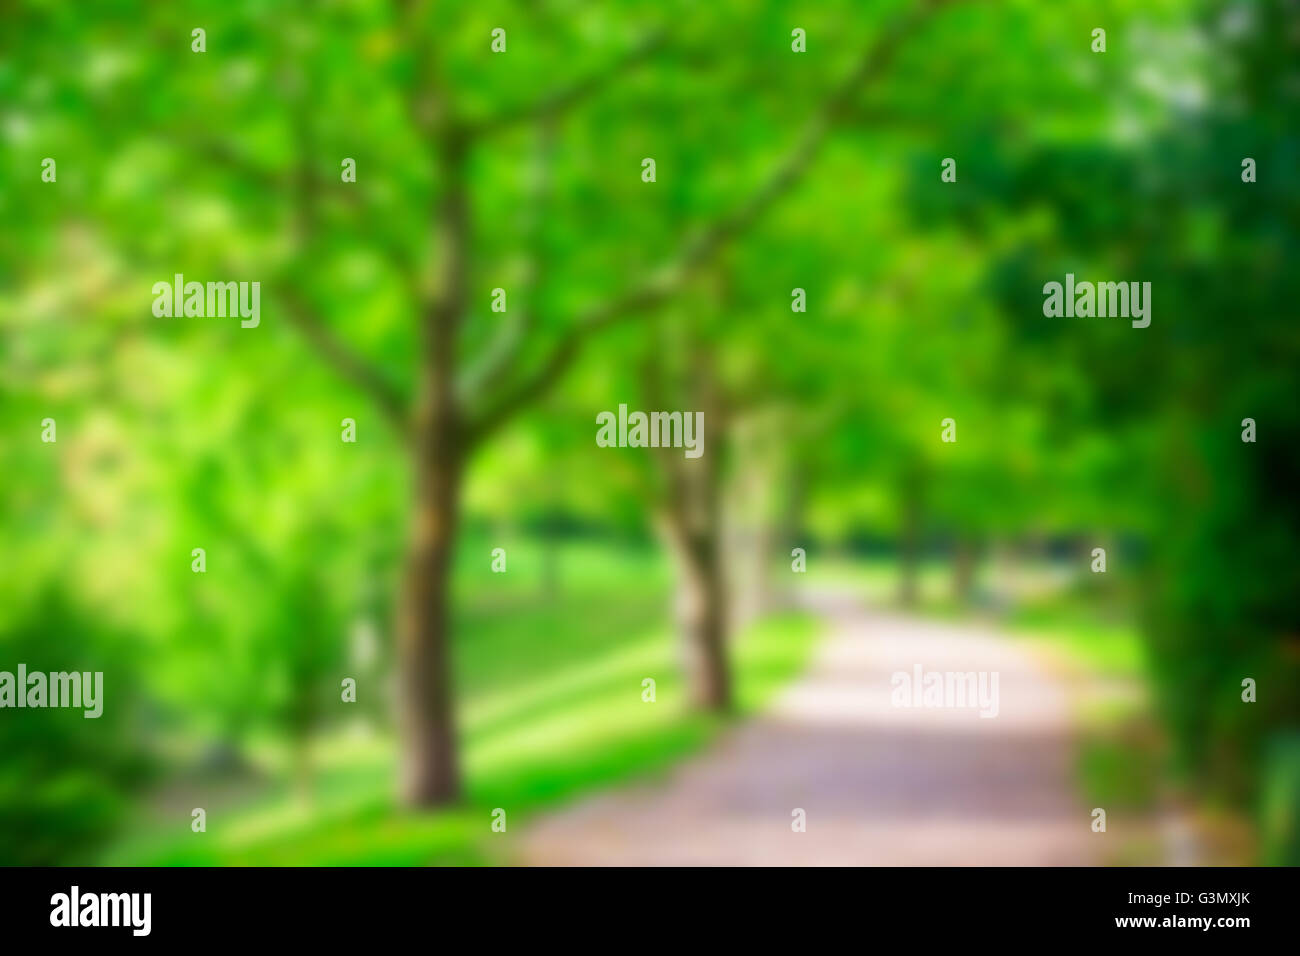 Abstract blur city park bokeh background Stock Photo - Alamy